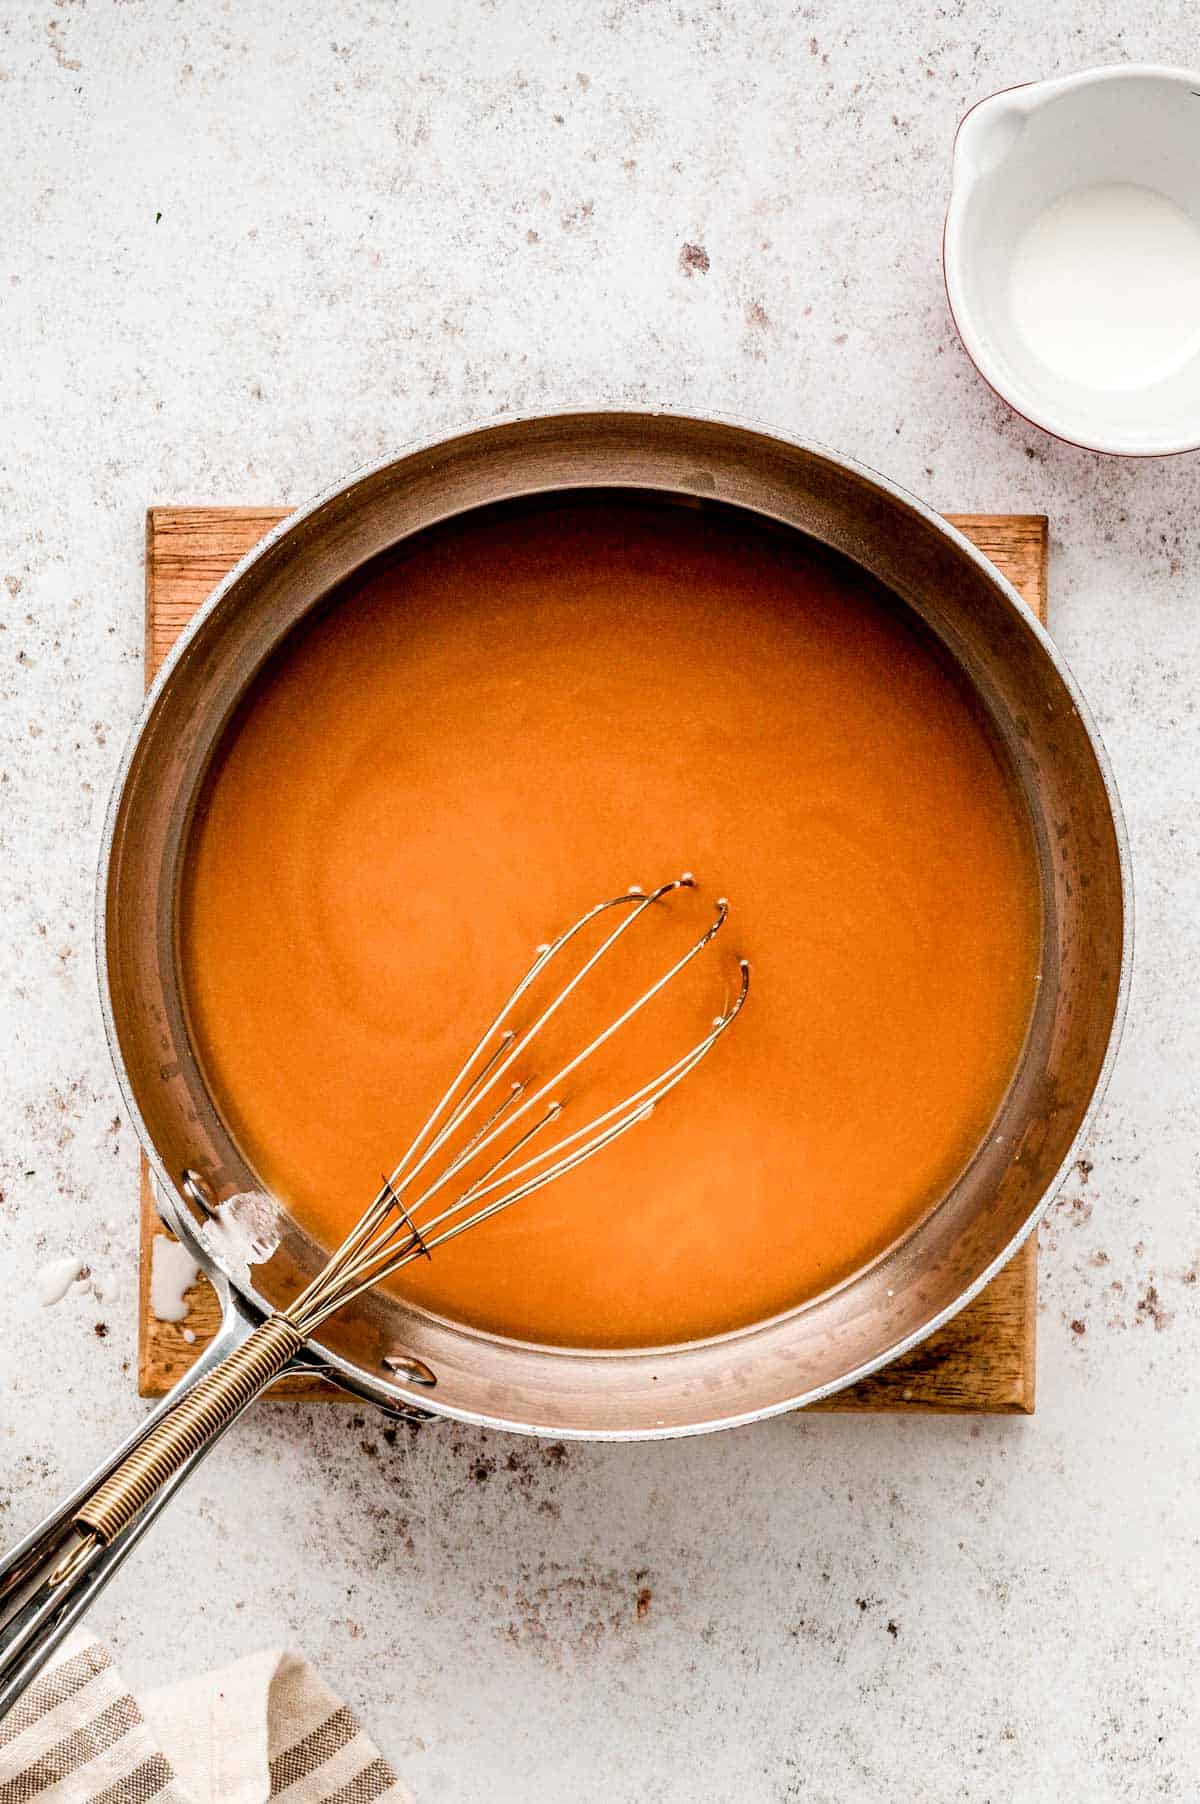 A whisk in a pot of gravy.